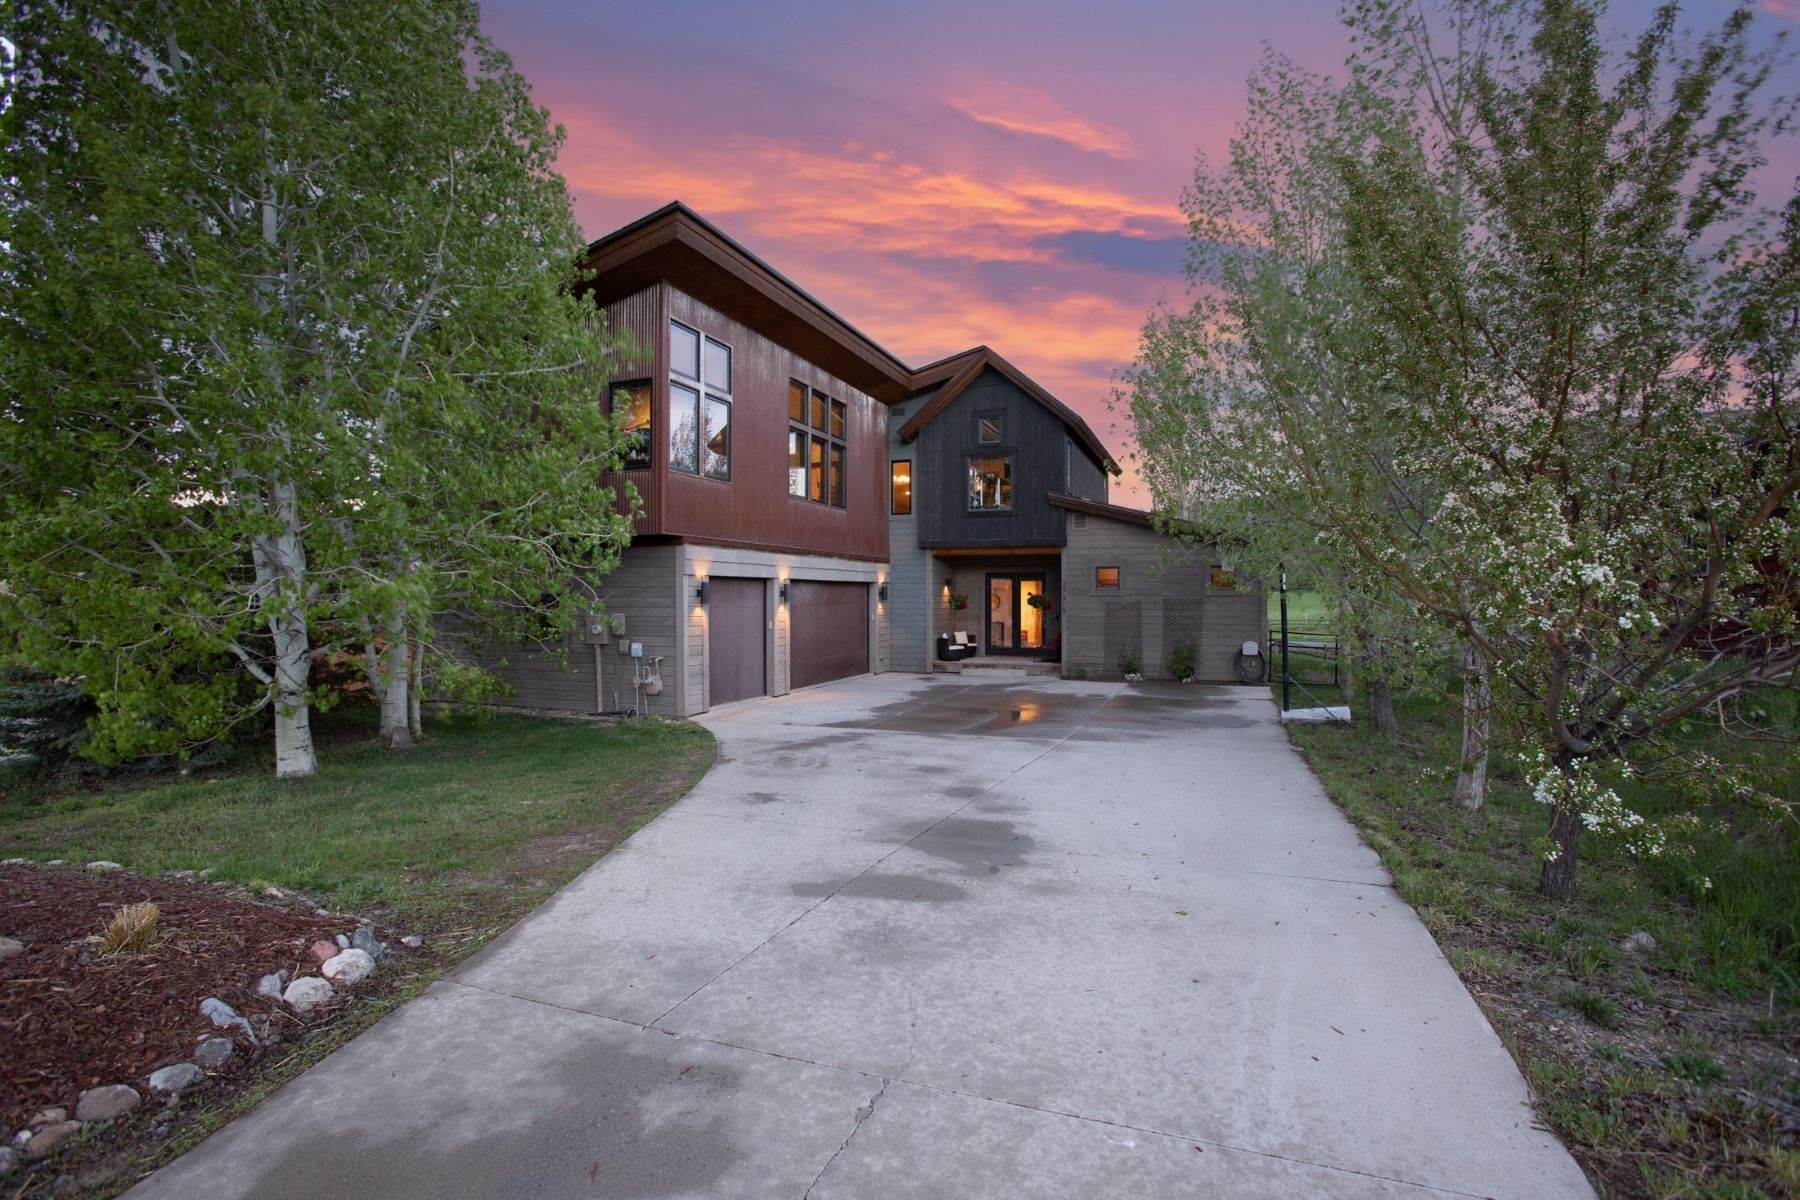 Property for Sale at 27319 Winchester Court, Steamboat Springs, CO, 80487 27319 Winchester Court Steamboat Springs, Colorado 80487 United States